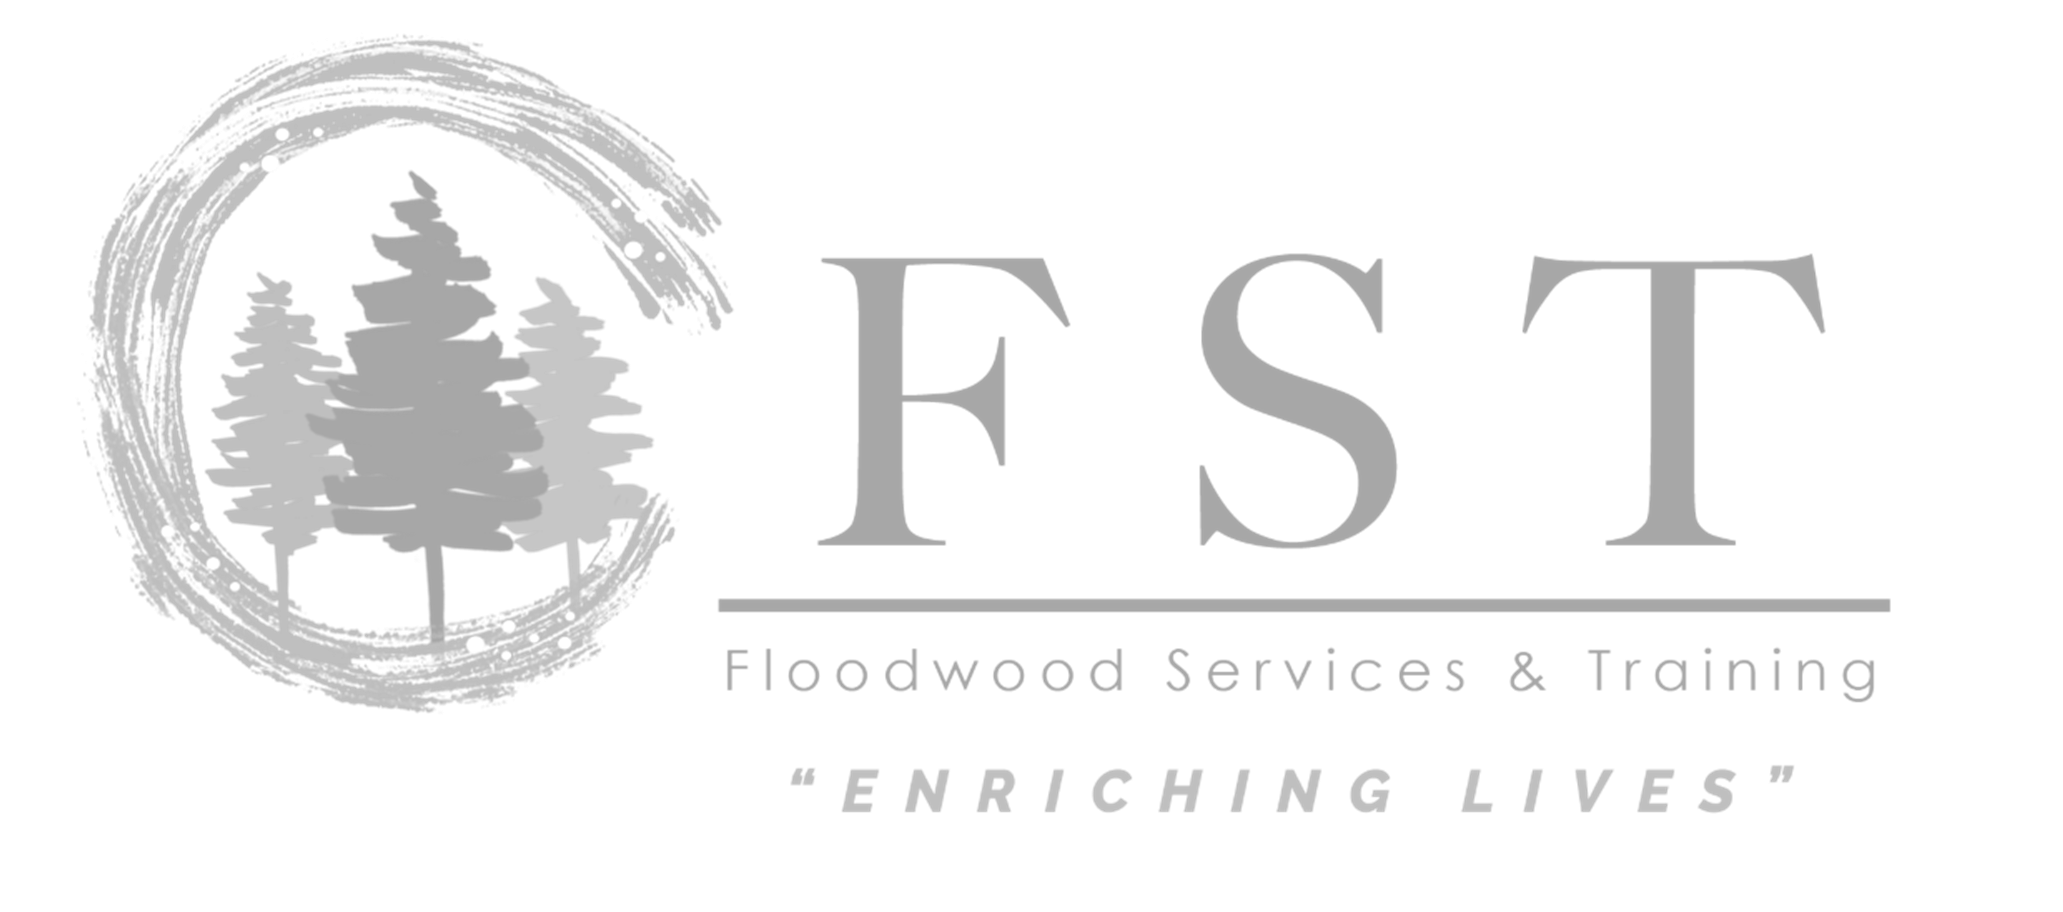 Floodwood Services and Training logo